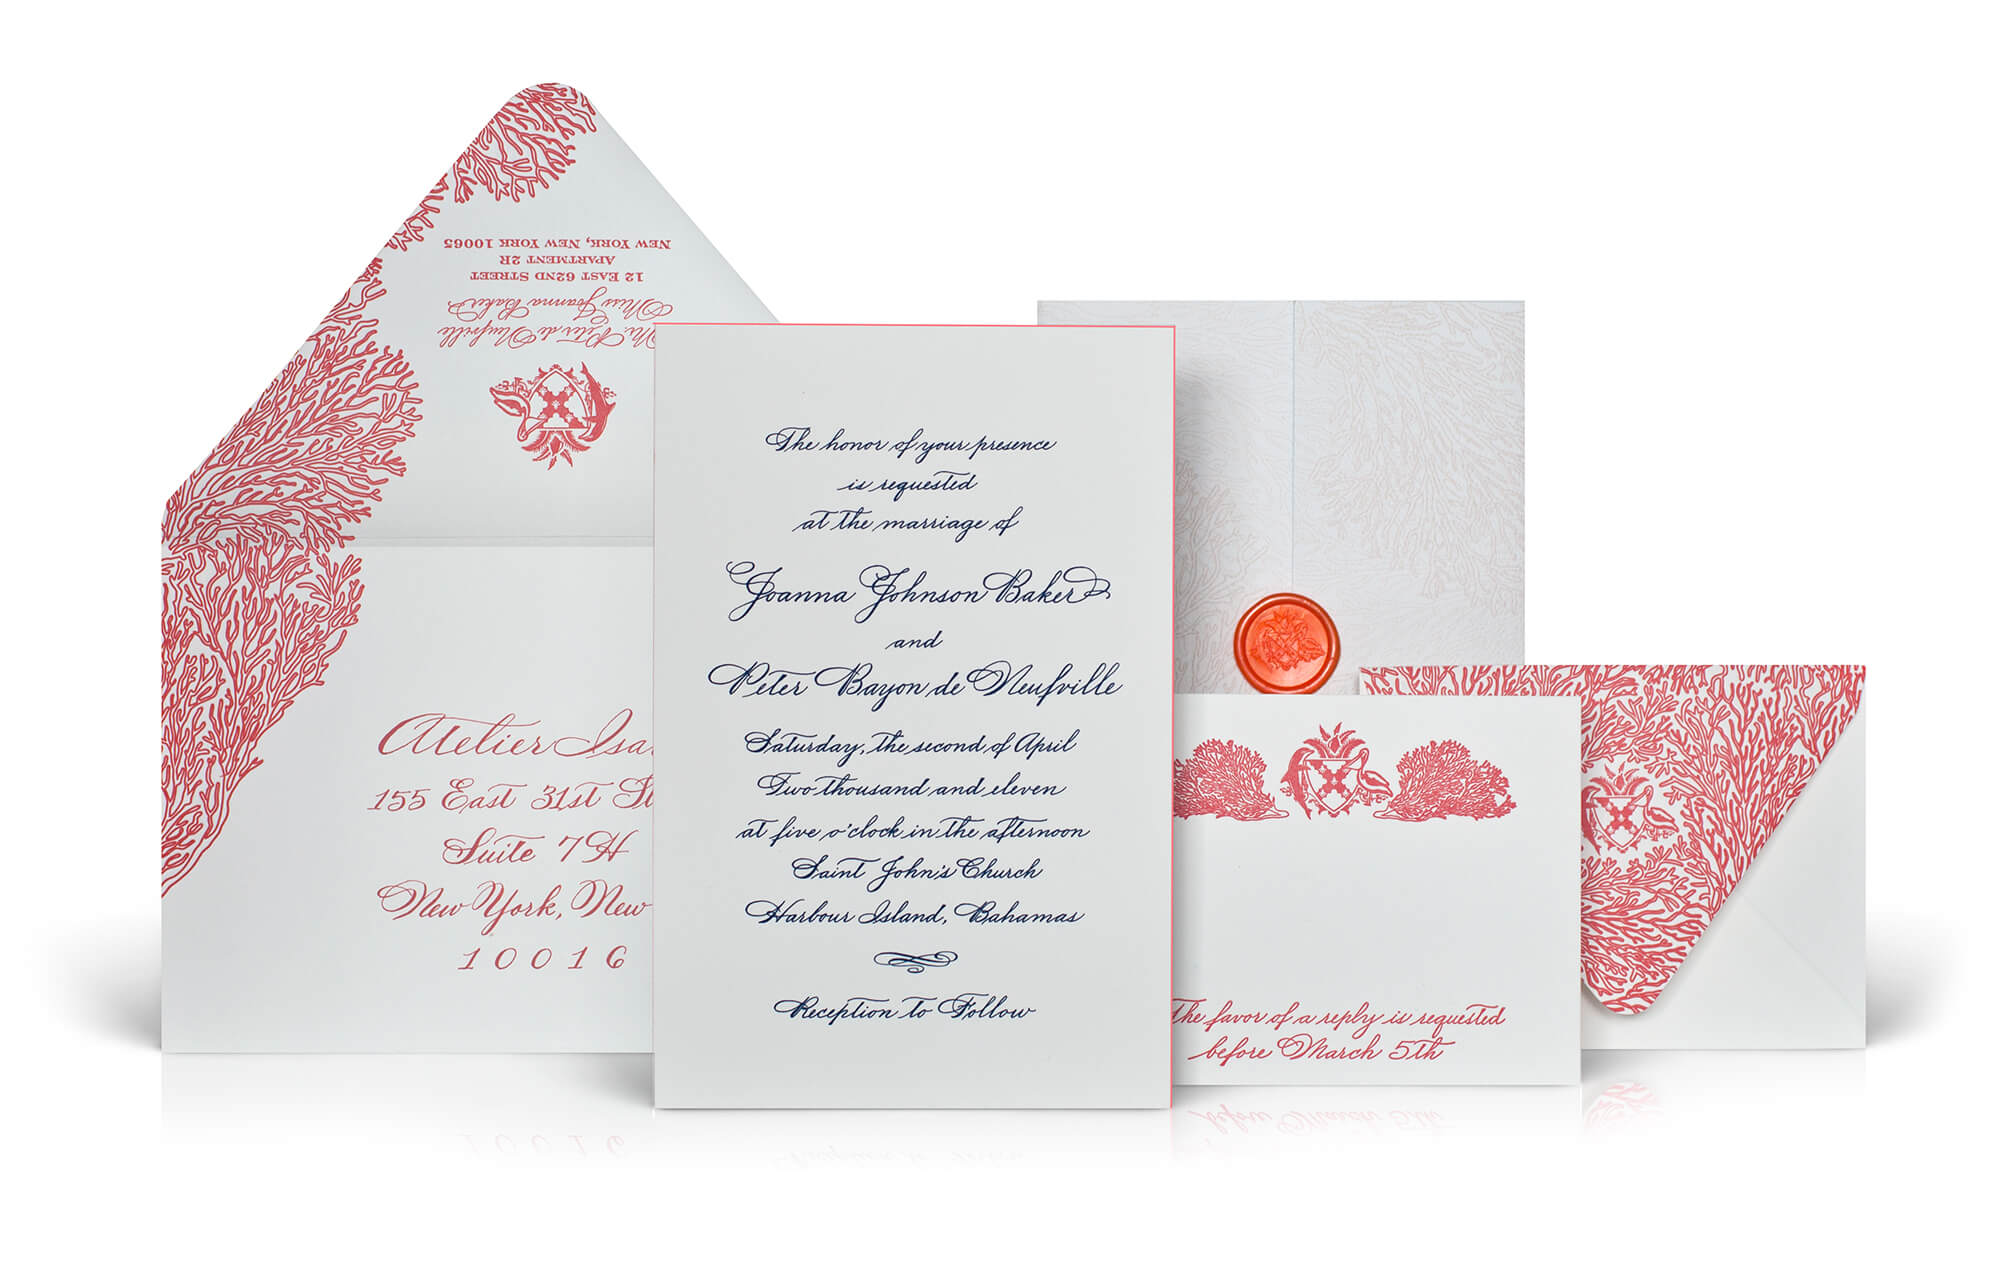 Engraved calligraphy, corals, watercolor on a Bahamas wedding invitation